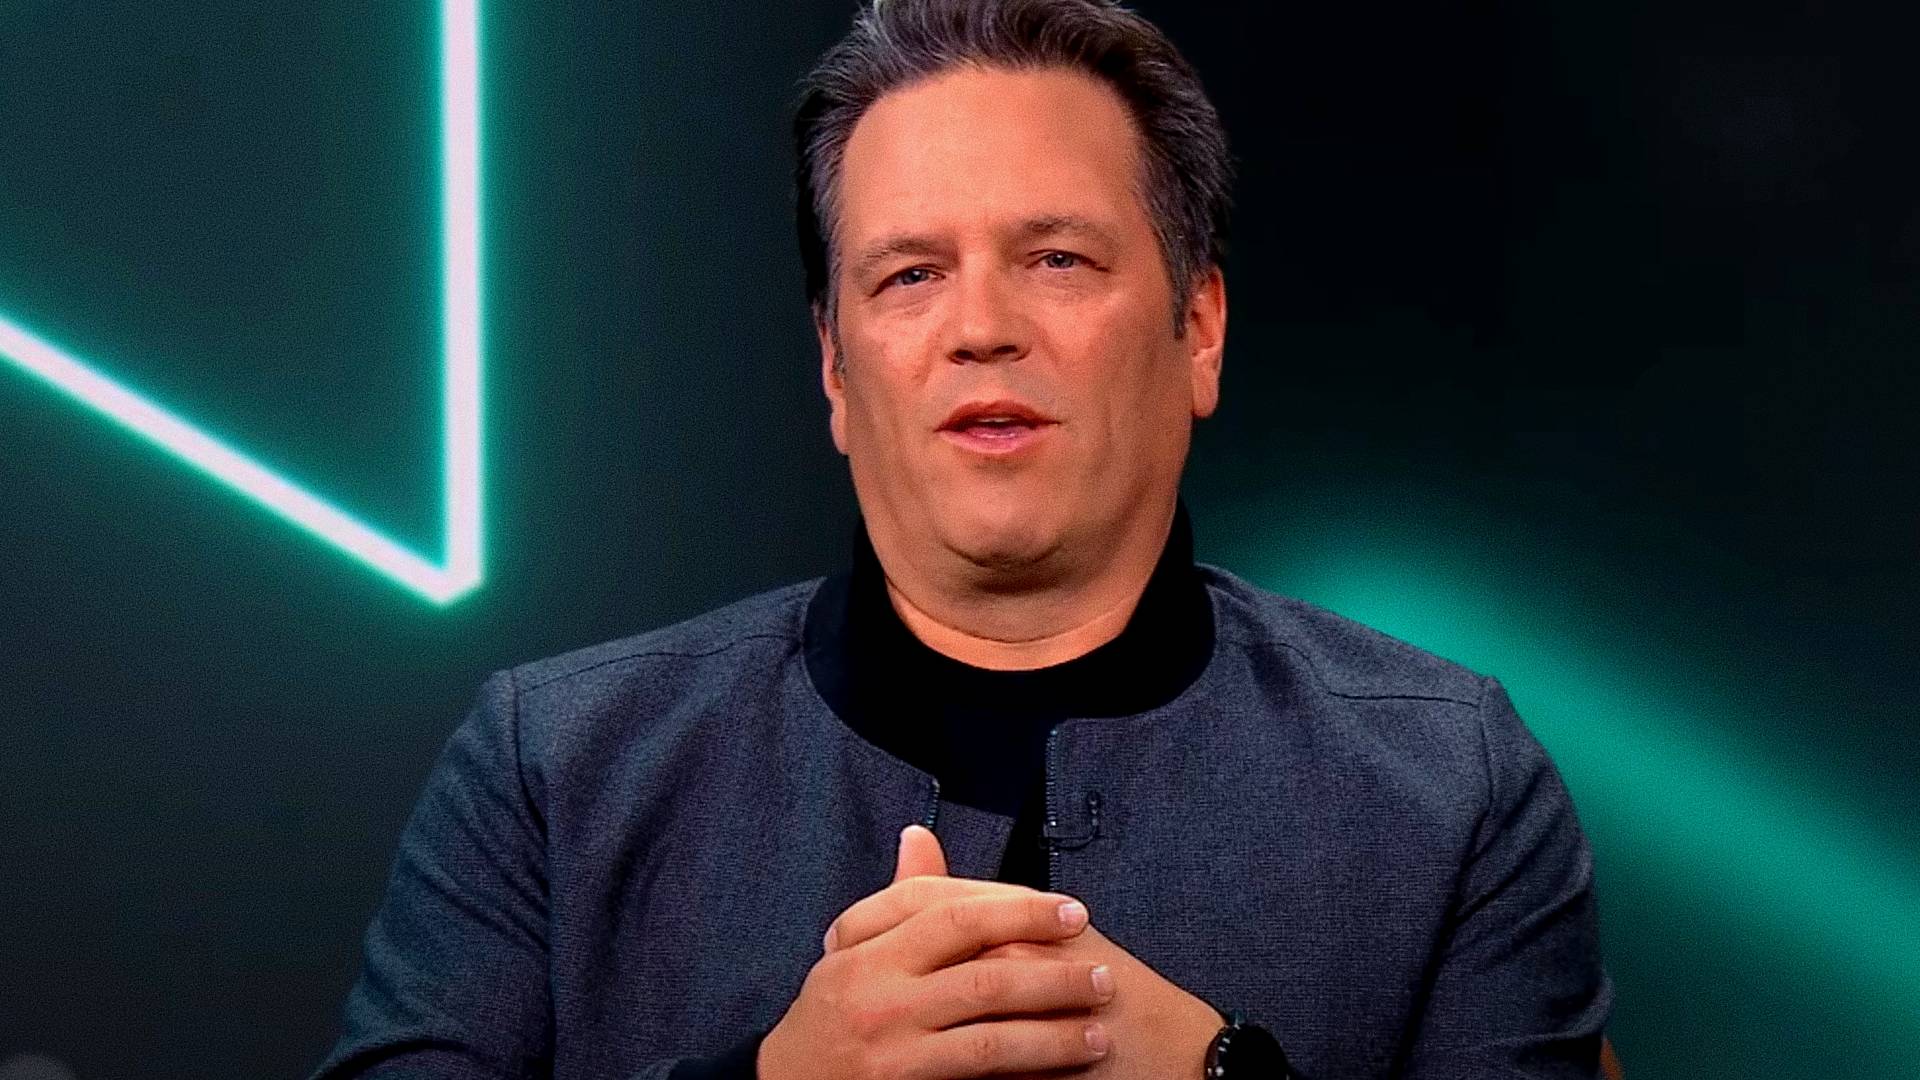 Xbox's Phil Spencer Wants More People Playing Call of Duty and WoW Than  Ever in 5 Years